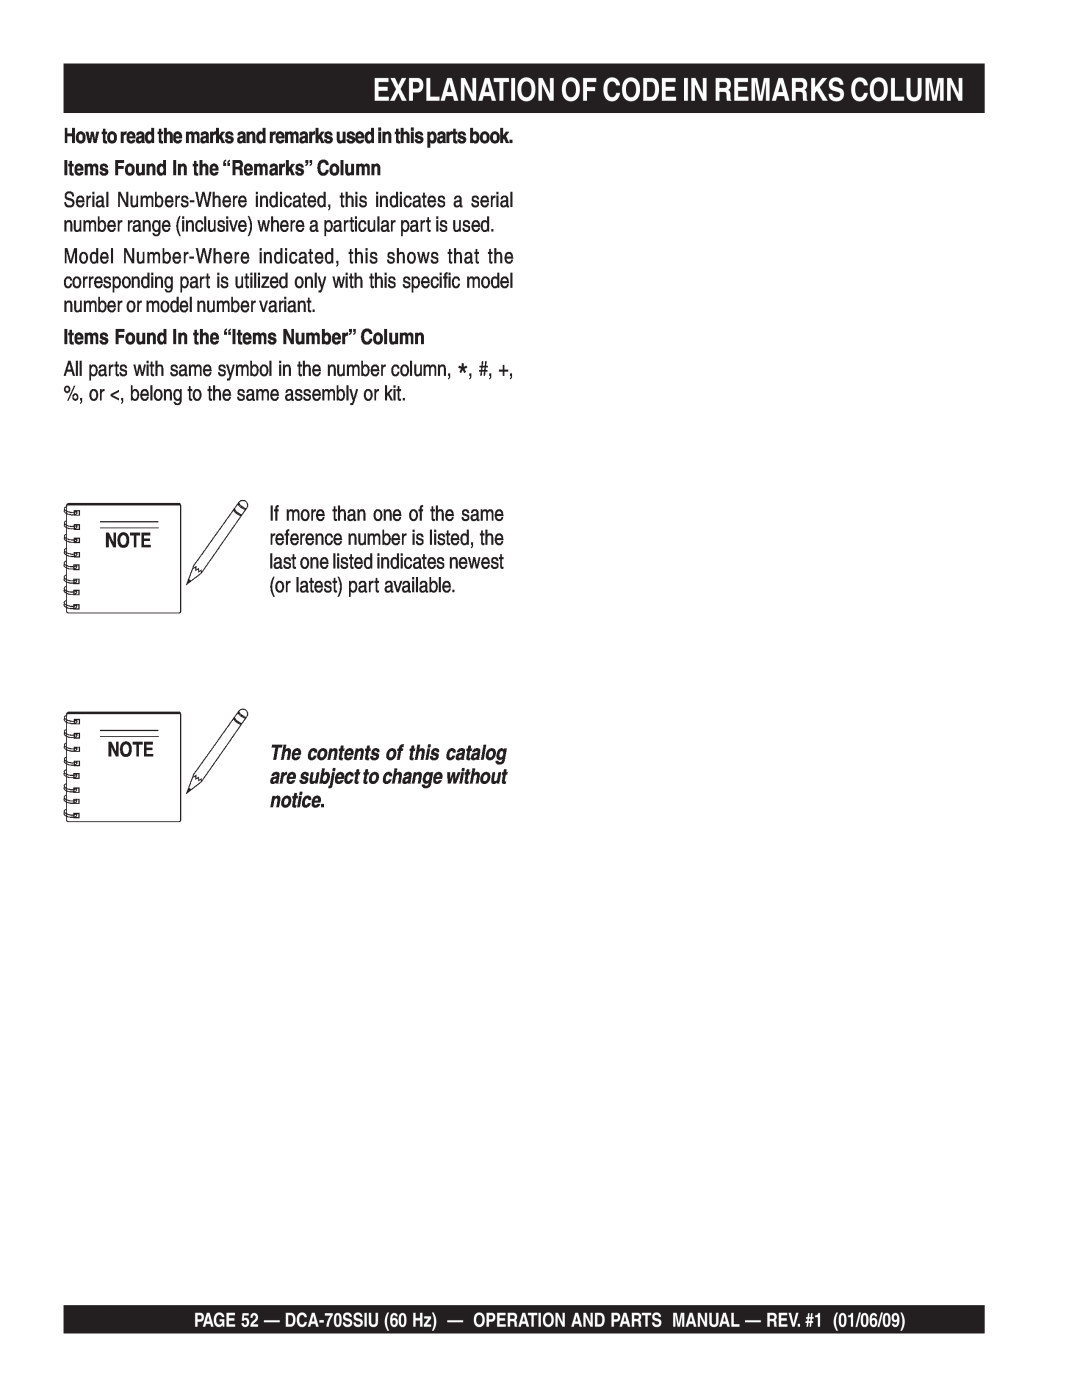 Multiquip M2870300504 Explanation Of Code In Remarks Column, How to read the marks and remarks used in this parts book 